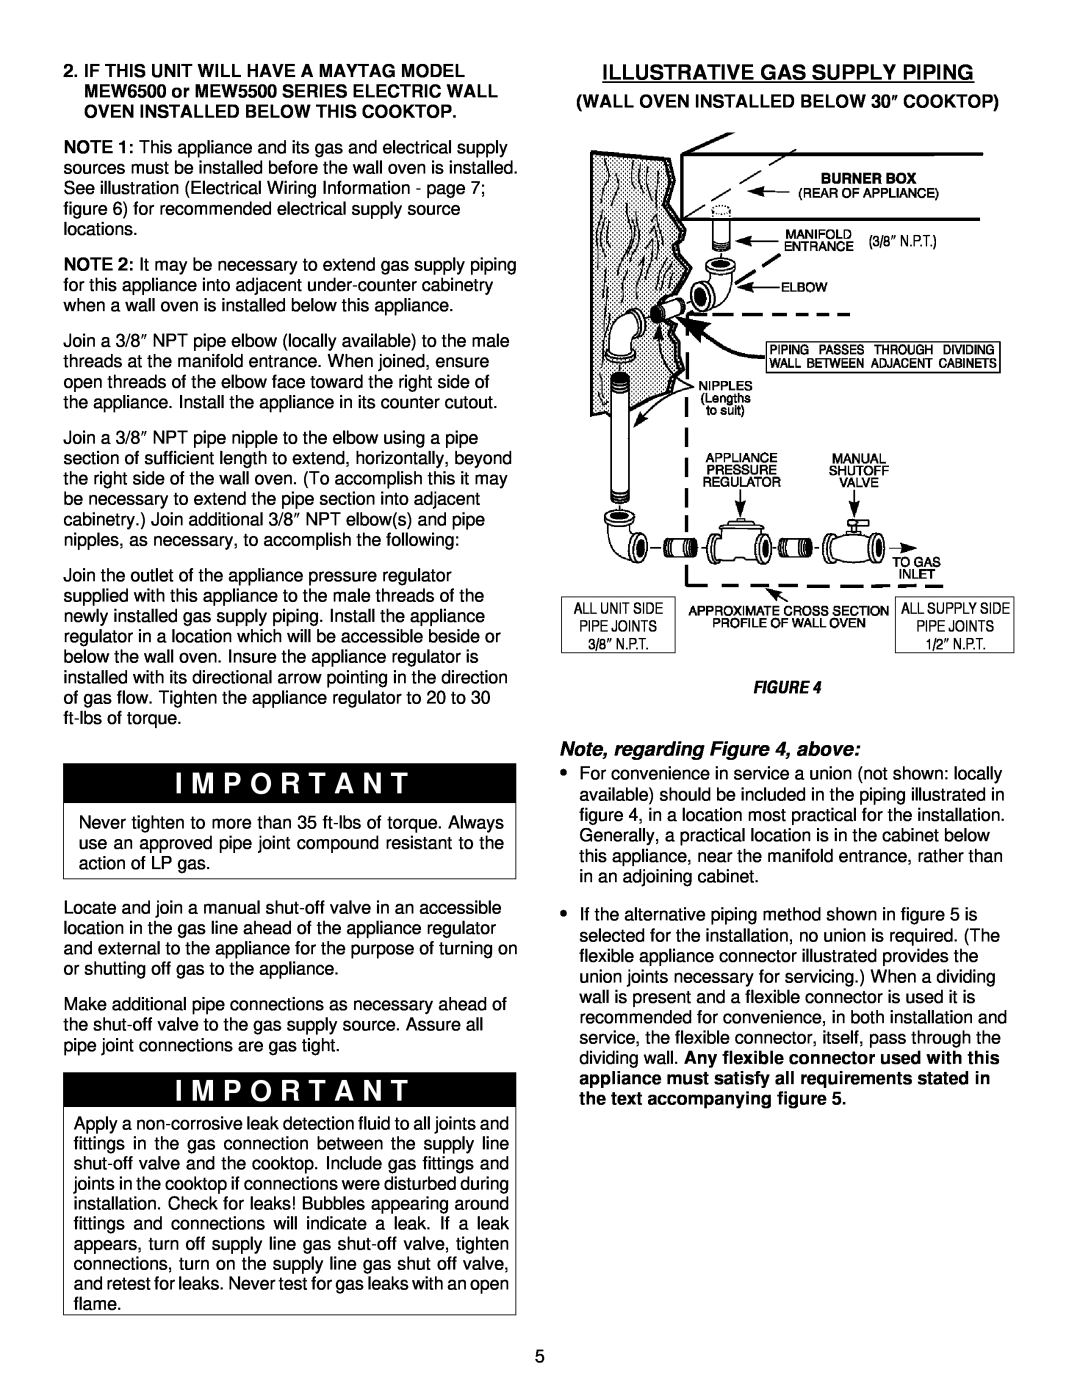 Maytag MGC5536 installation manual Note, regarding , above, WALL OVEN INSTALLED BELOW 30 COOKTOP, I M P O R T A N T 